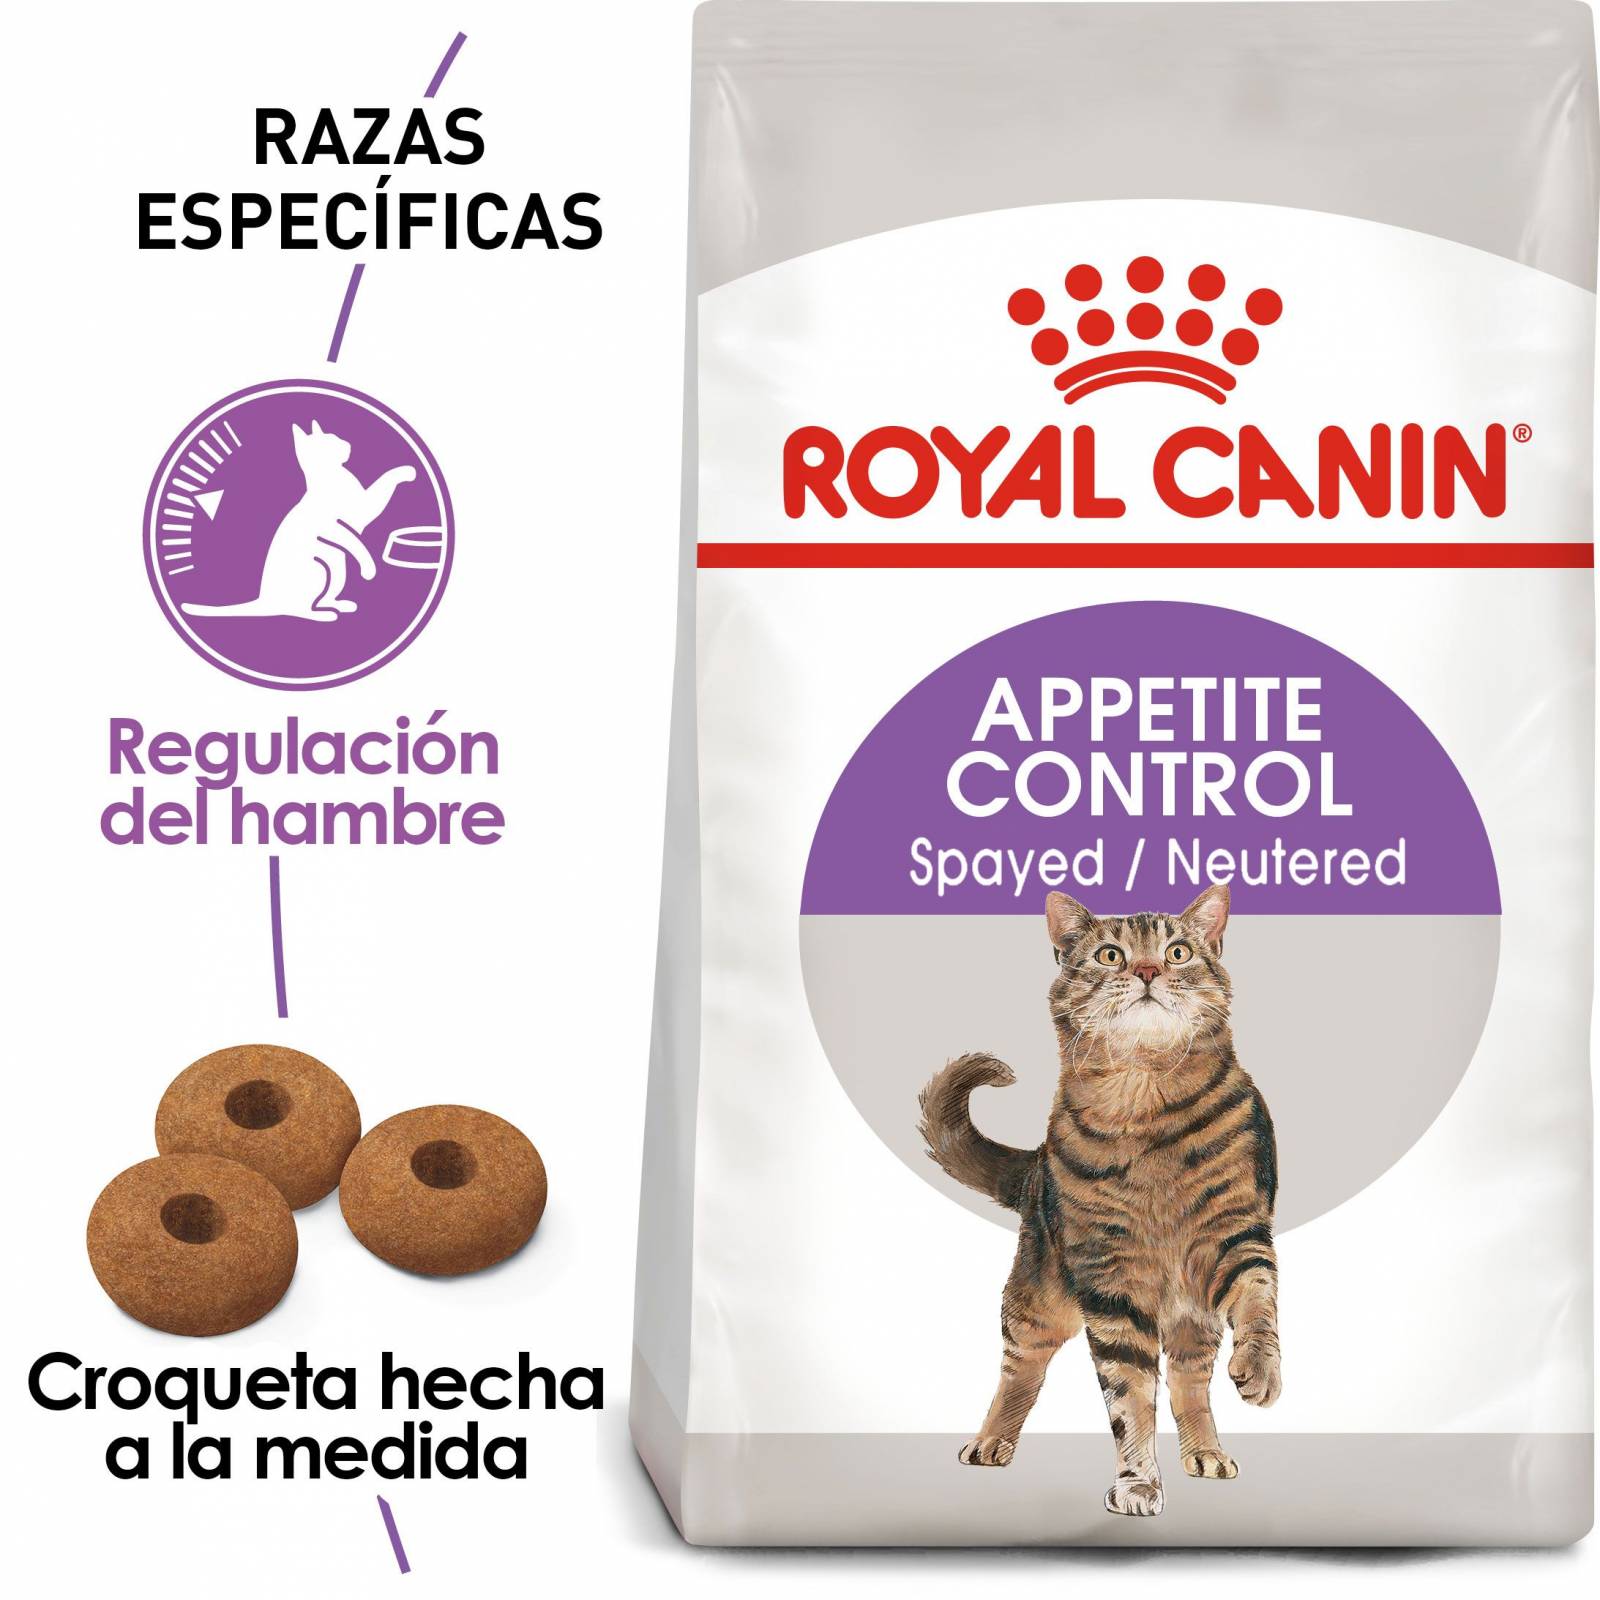 ROYAL CANIN SPAYED NEUTERED APPETITE CONTROL5.9kg